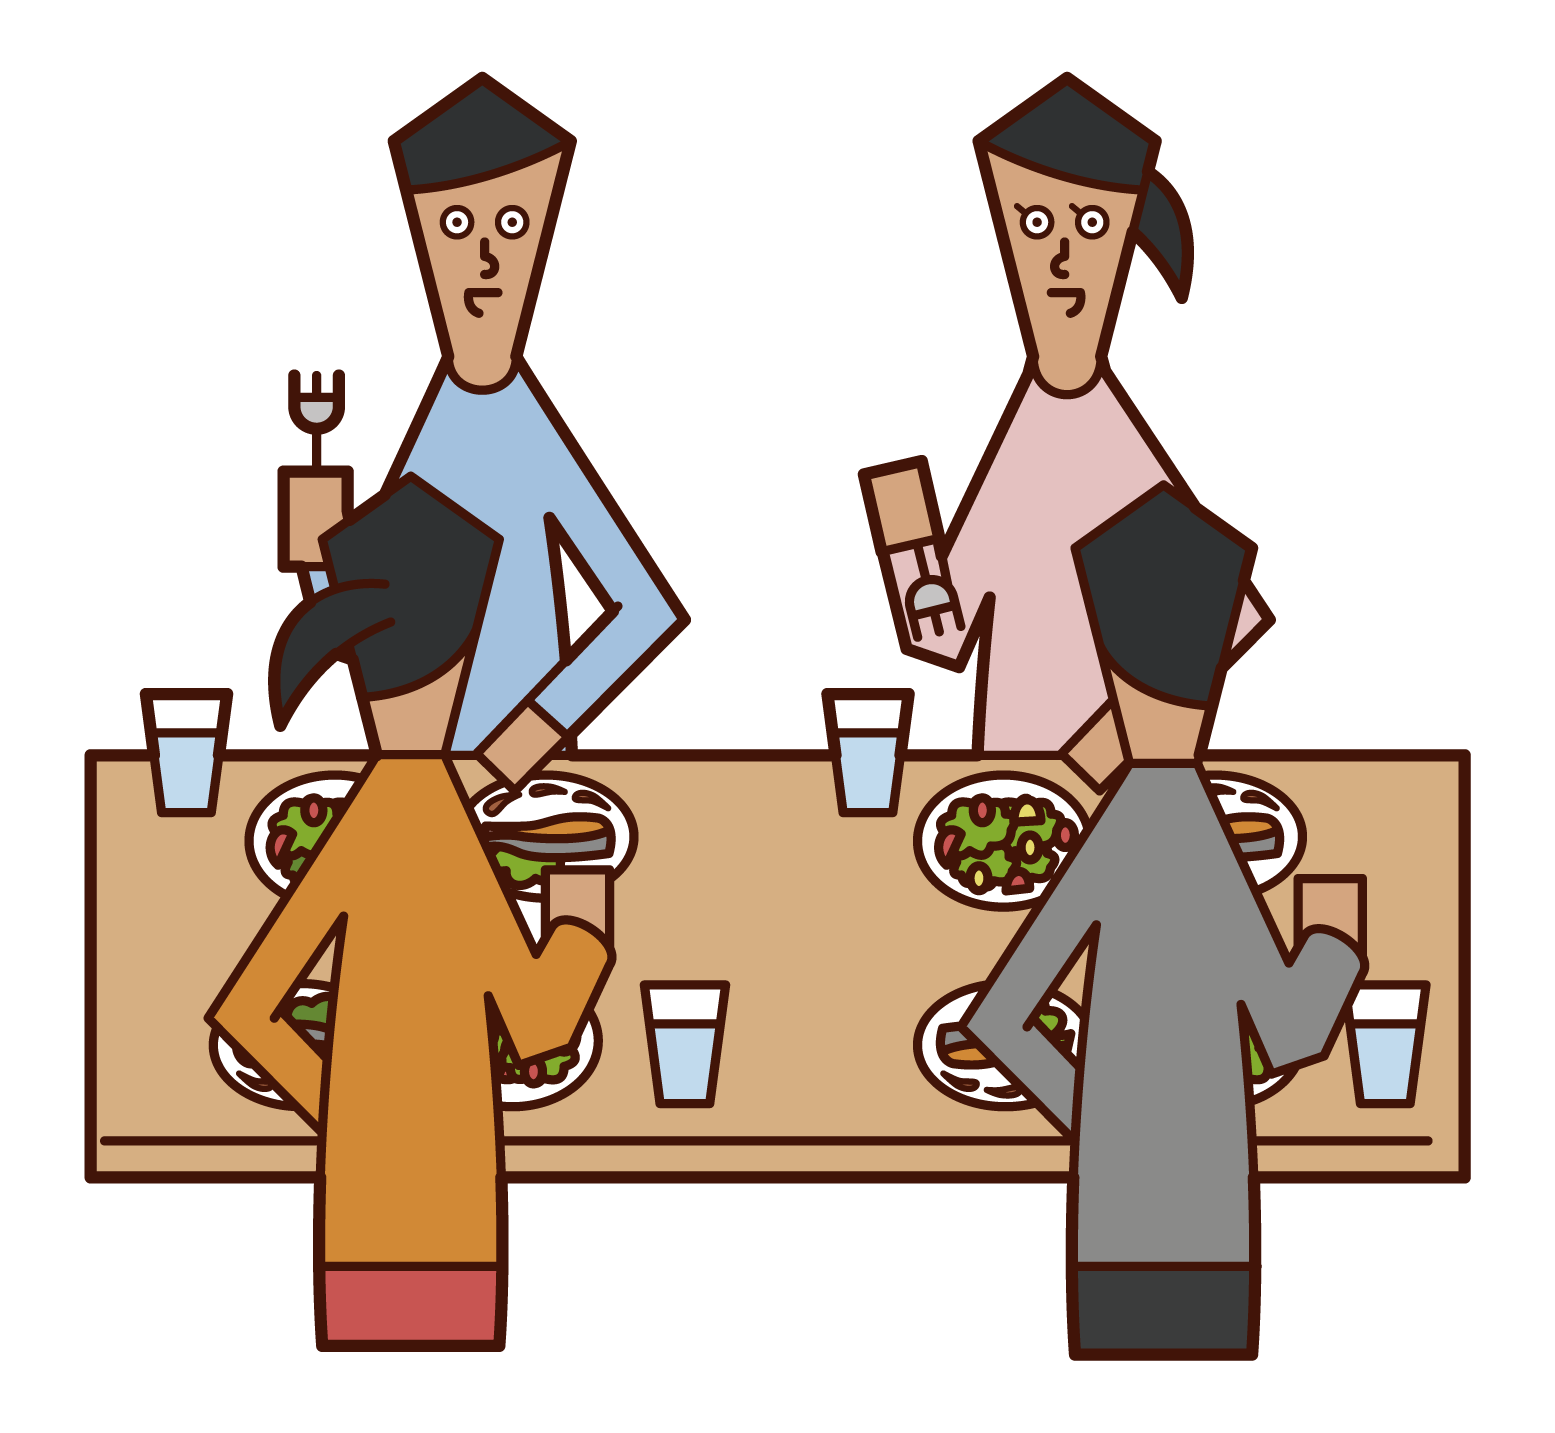 Illustrations of people (men and women) enjoying lunch